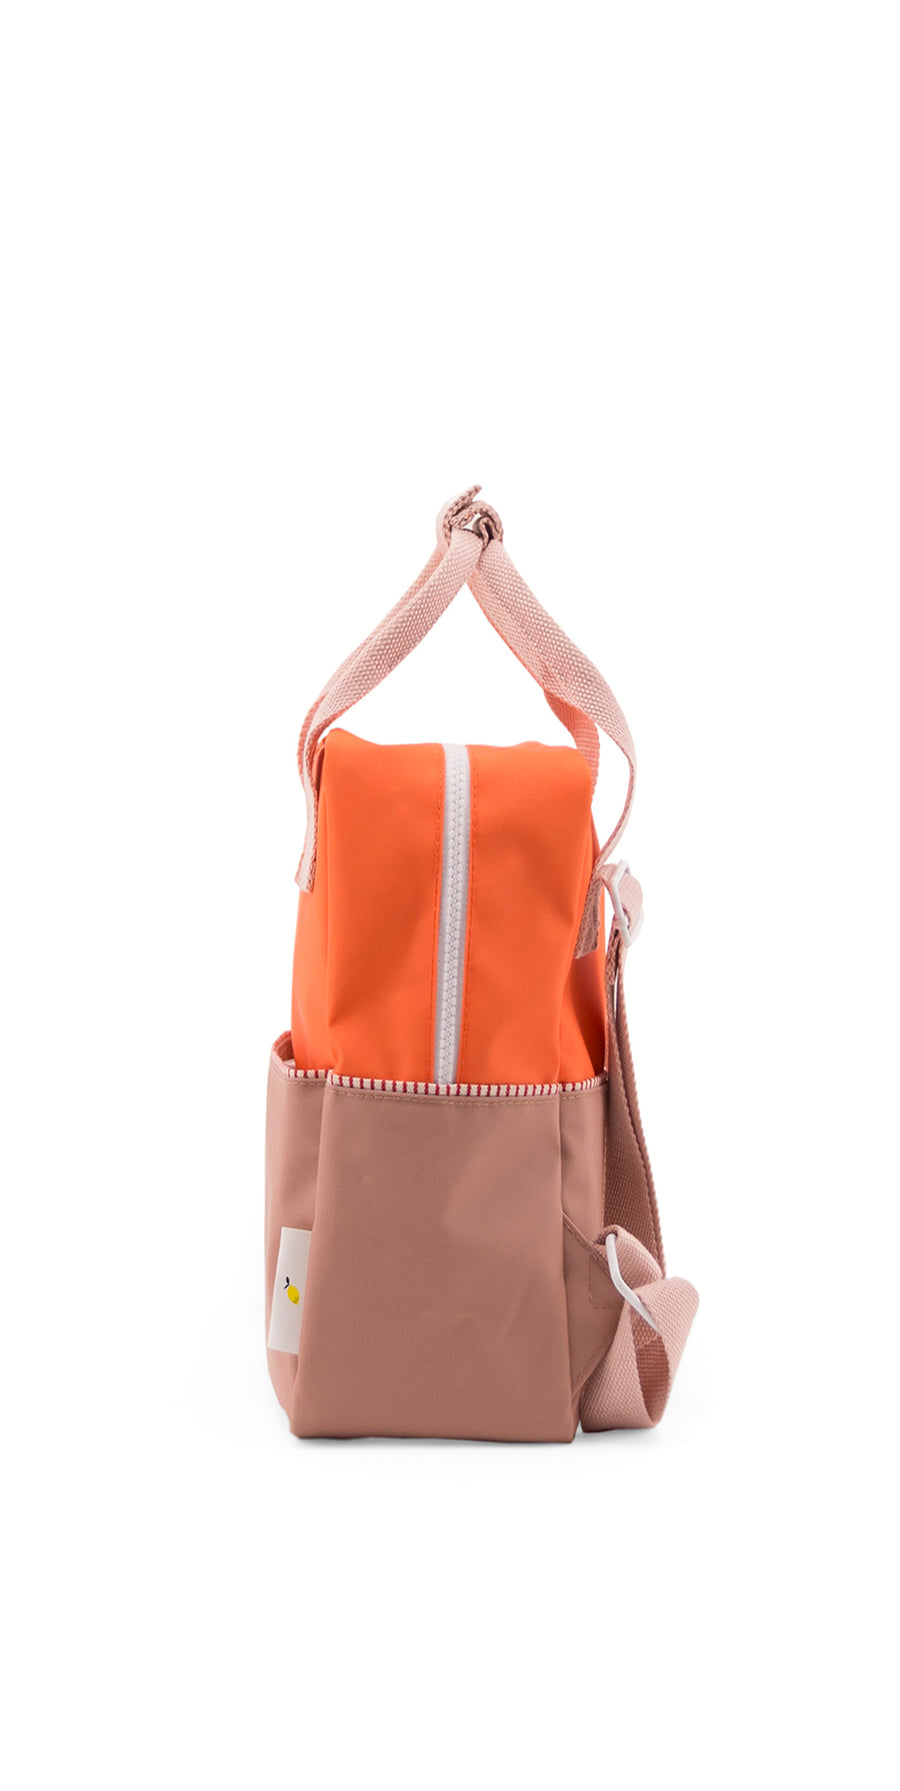 Sticky Lemon Color Block Collection Small Backpack, Royal Orange/Chocolat/Pastry Pink